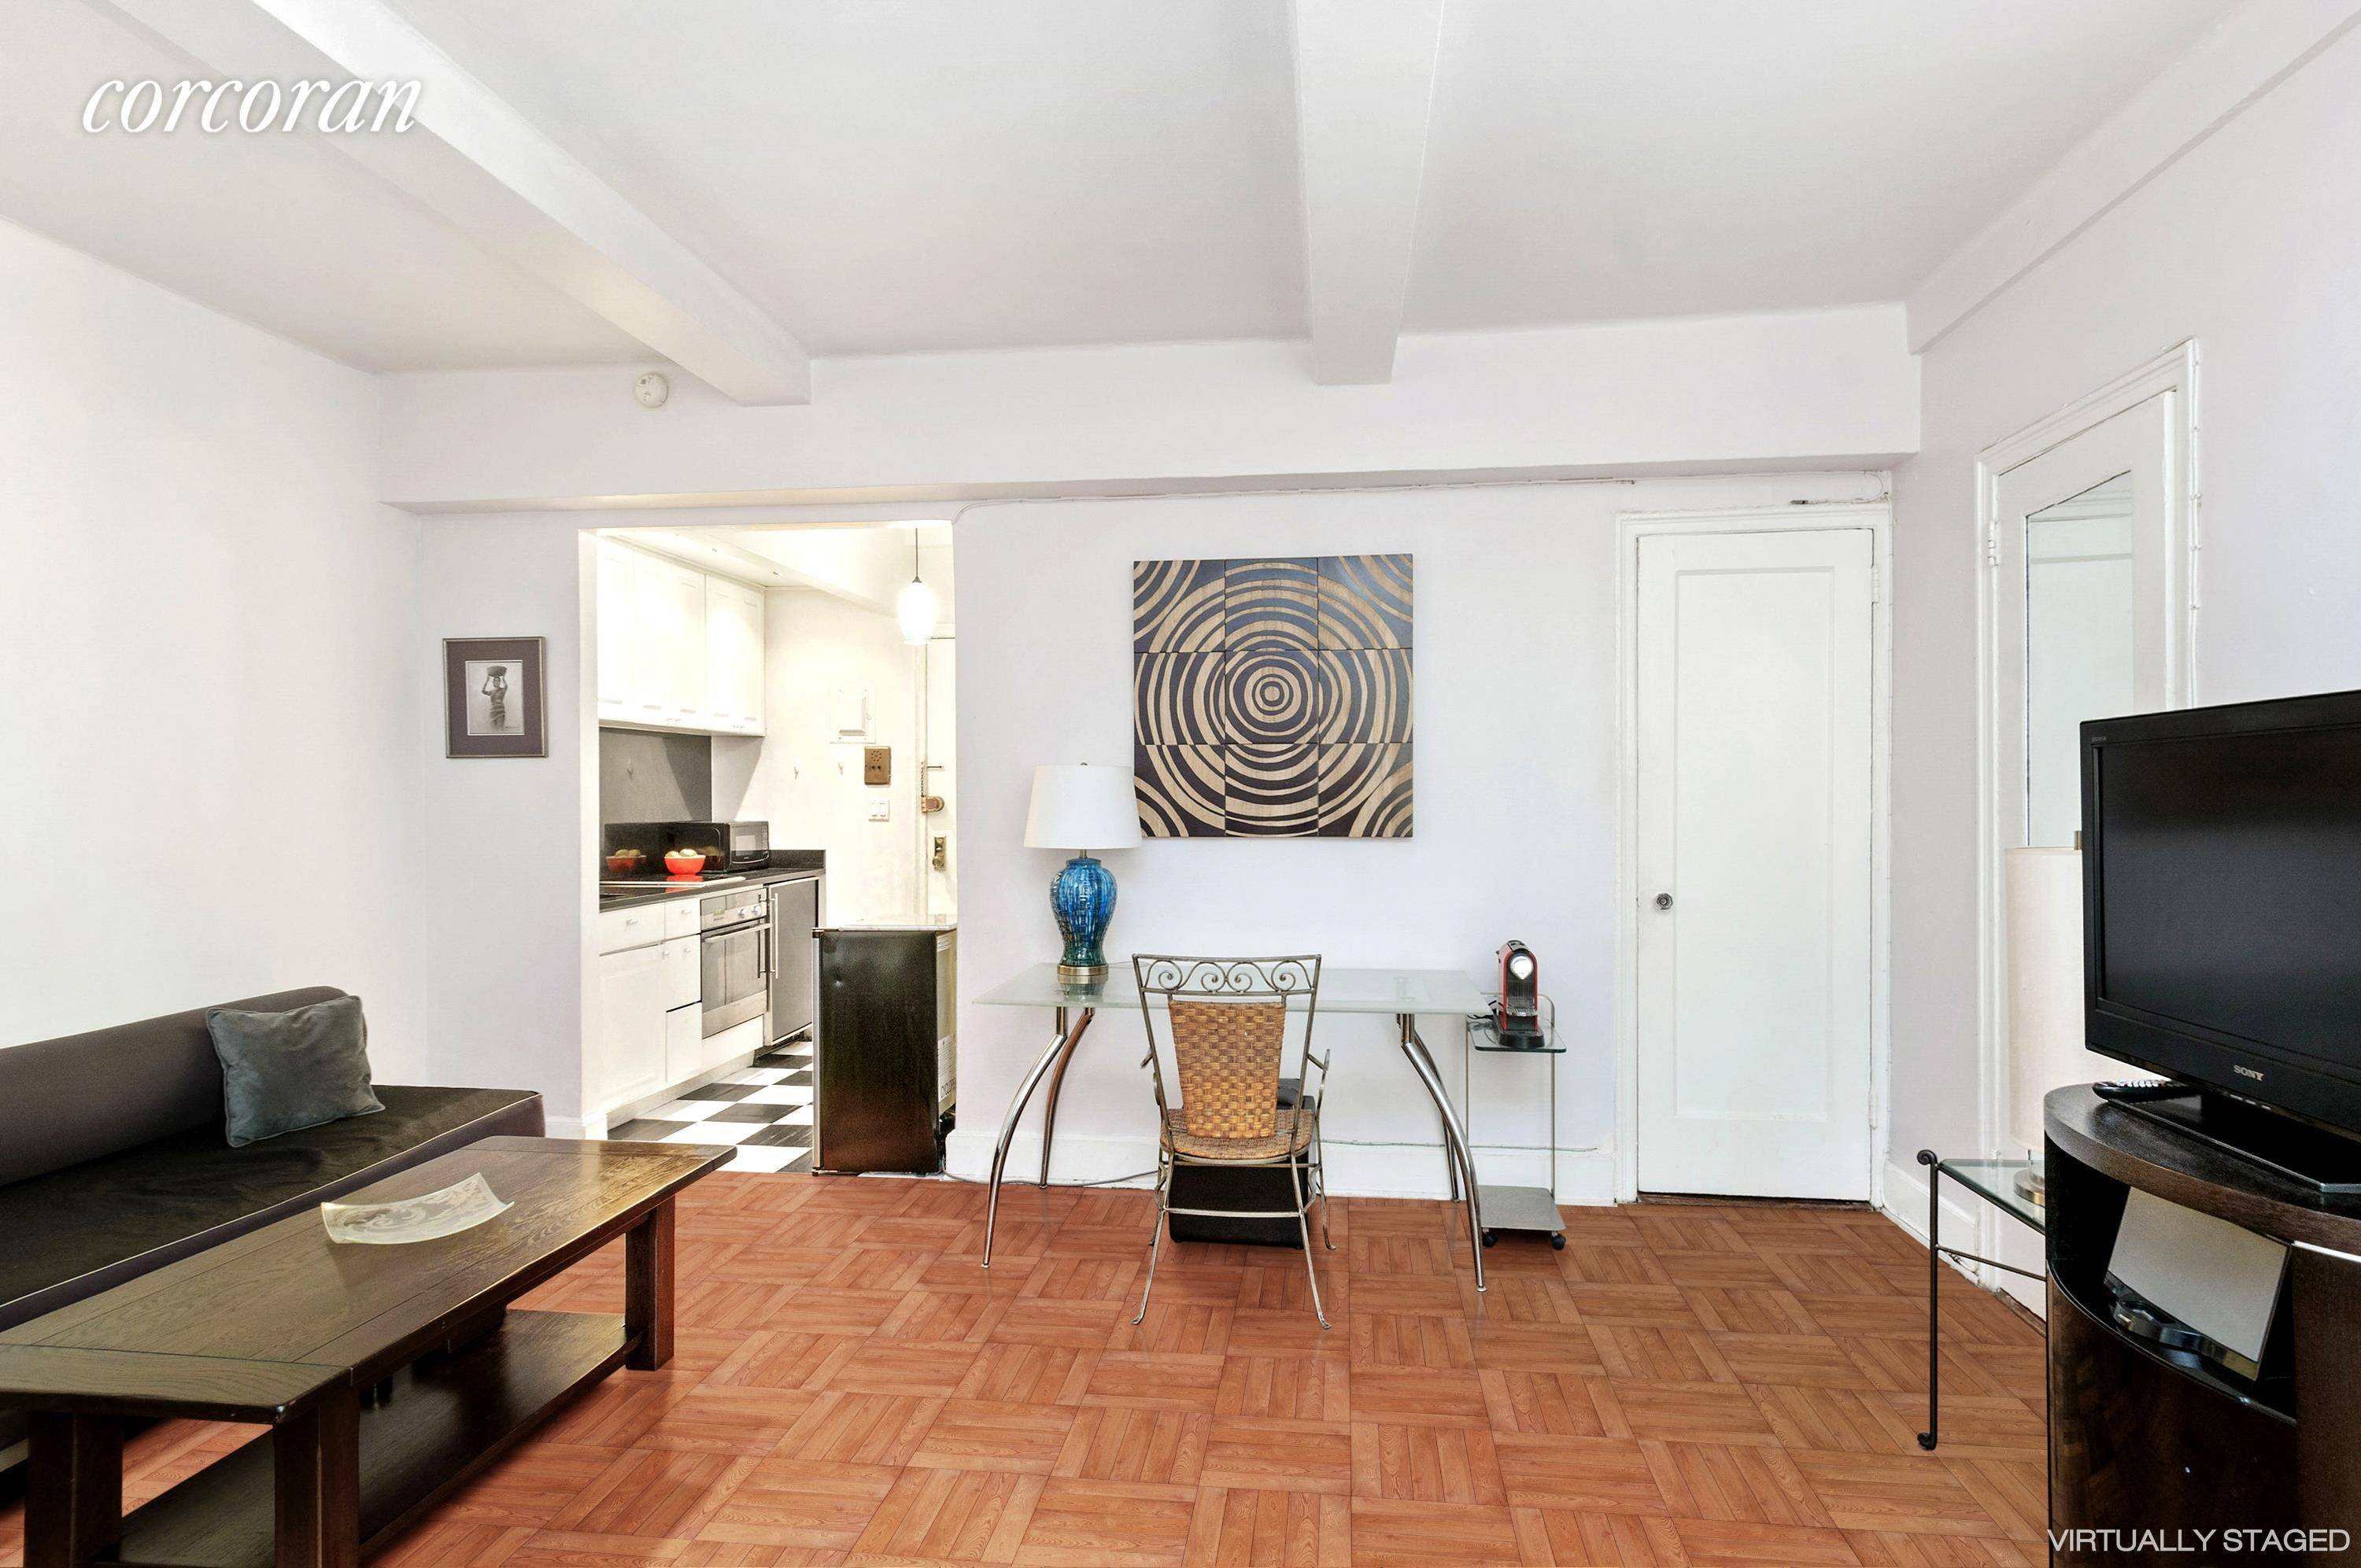 Expansive 2 room alcove studio located at 24 Fifth Avenue apt 822.